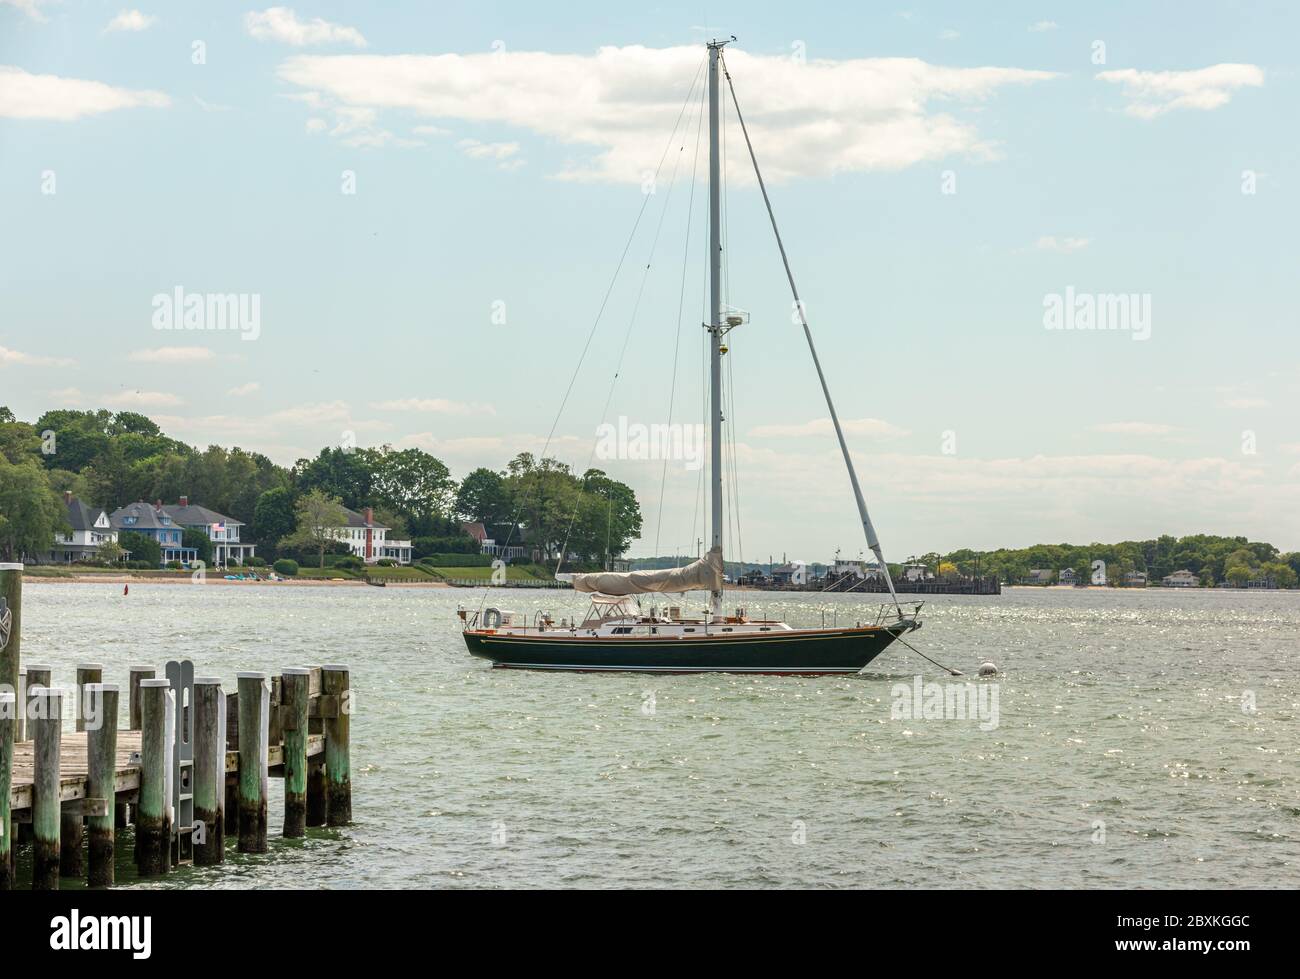 Large sail boat on a mooring in Dering Harbor, Shelter Island, NY Stock Photo